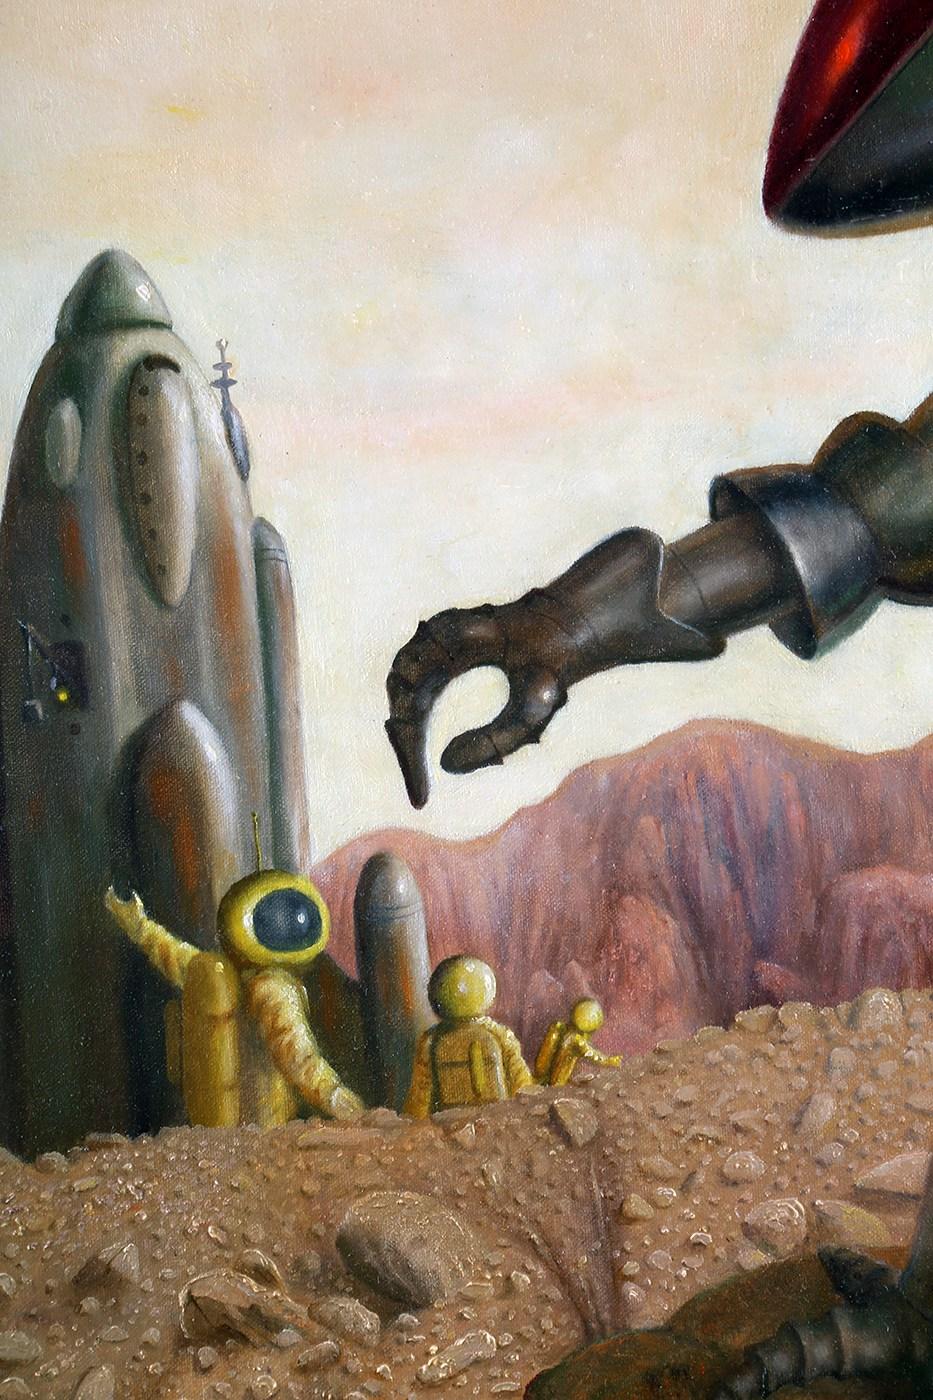 The Exploration - Painting by Raymond Bayless